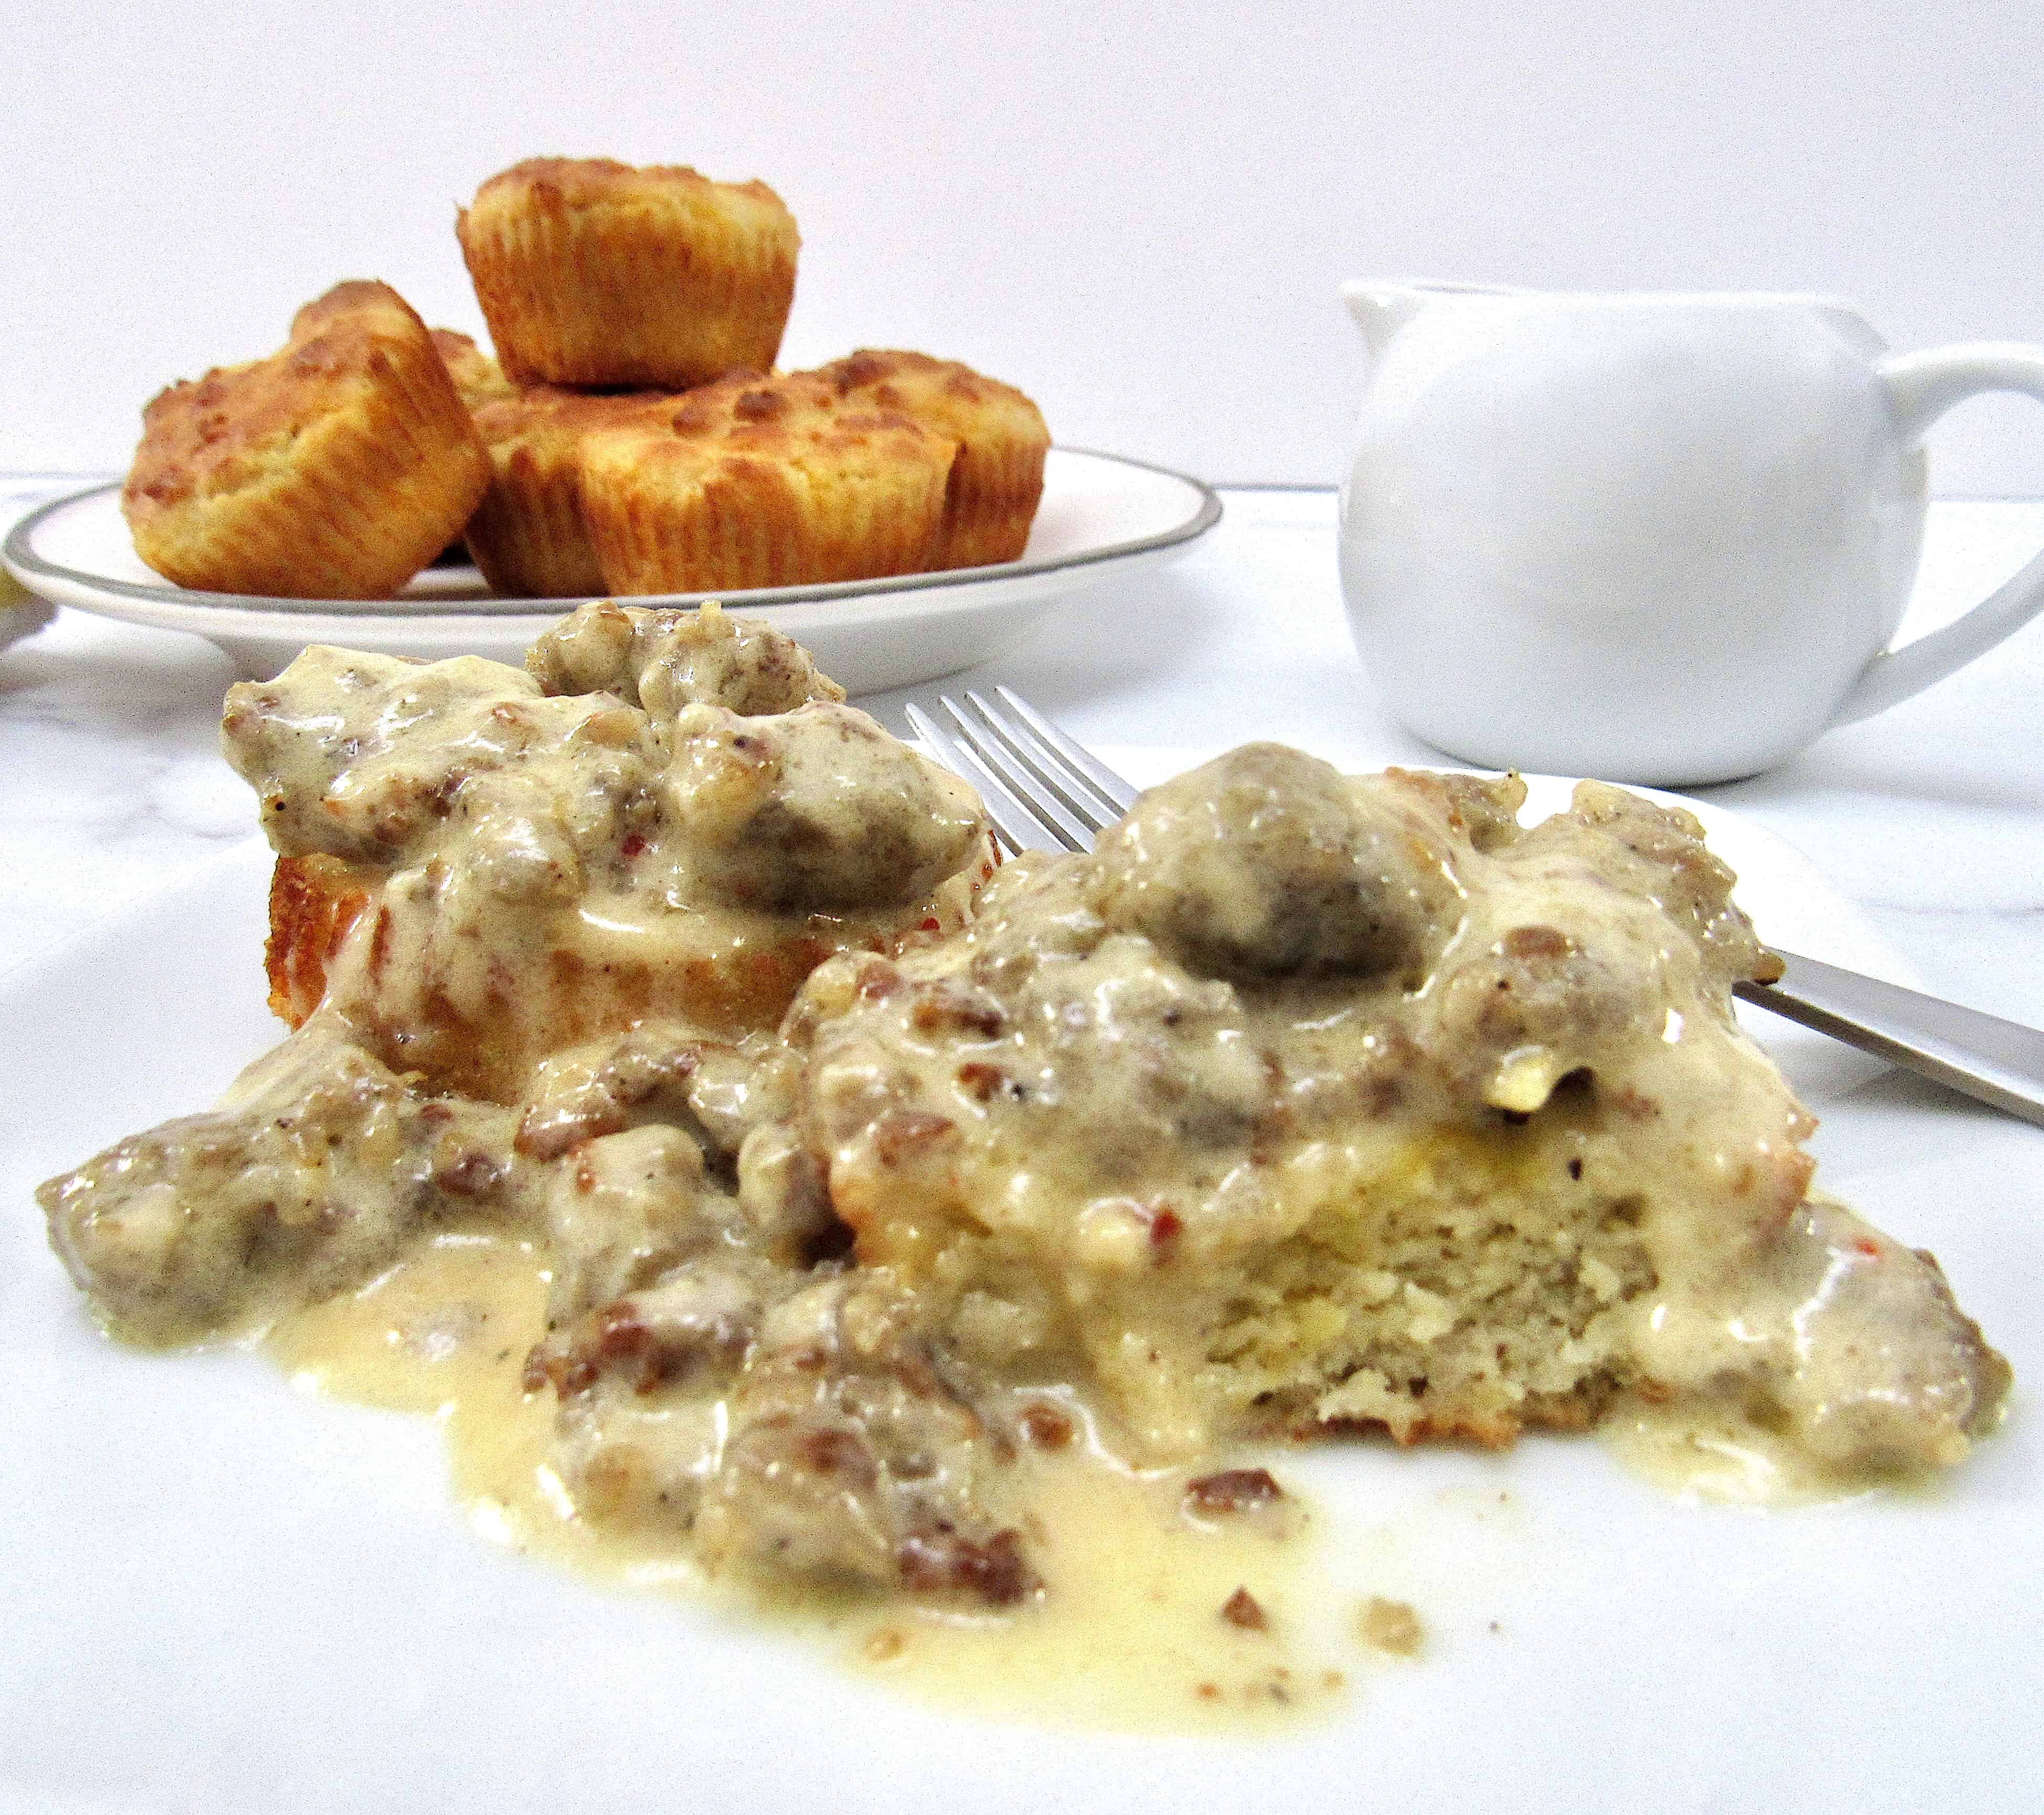 Biscuits and Gravy on plate with biscuits in background